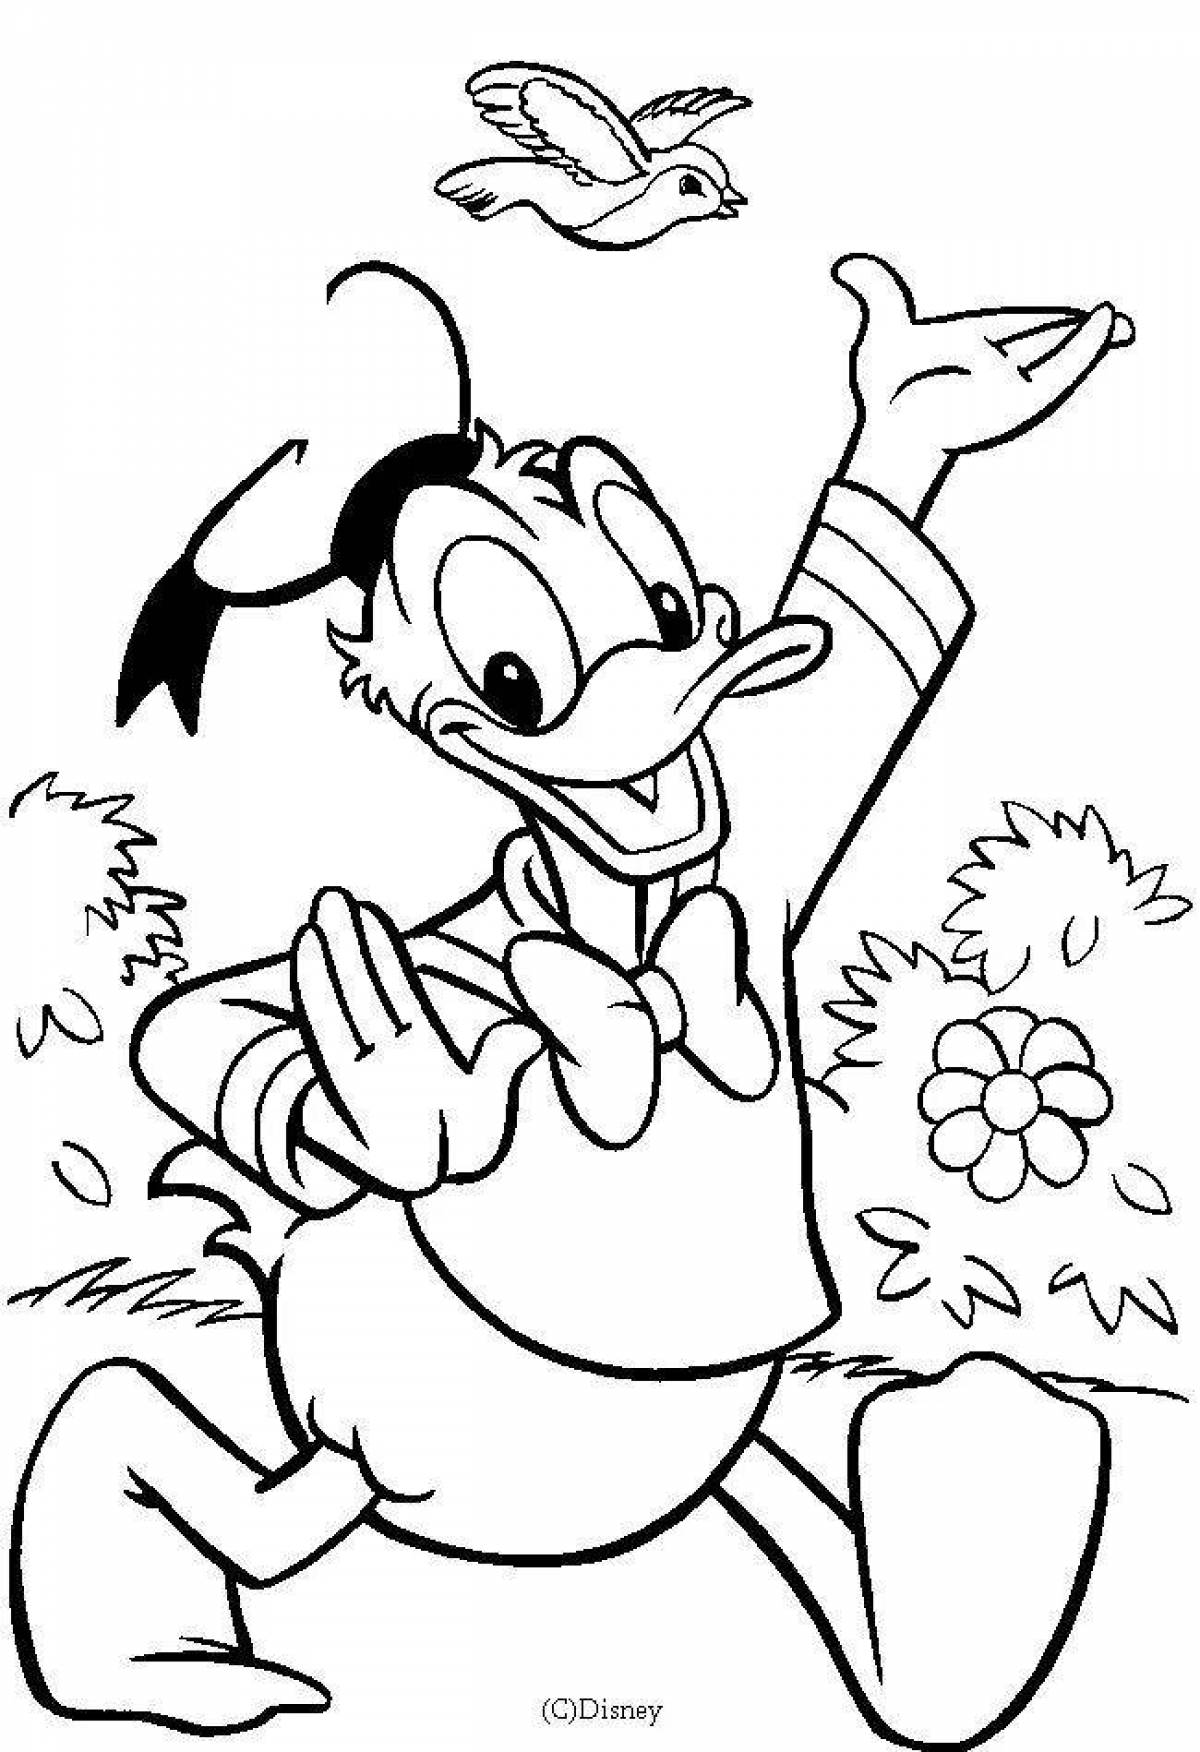 Coloring book outstanding cartoon characters